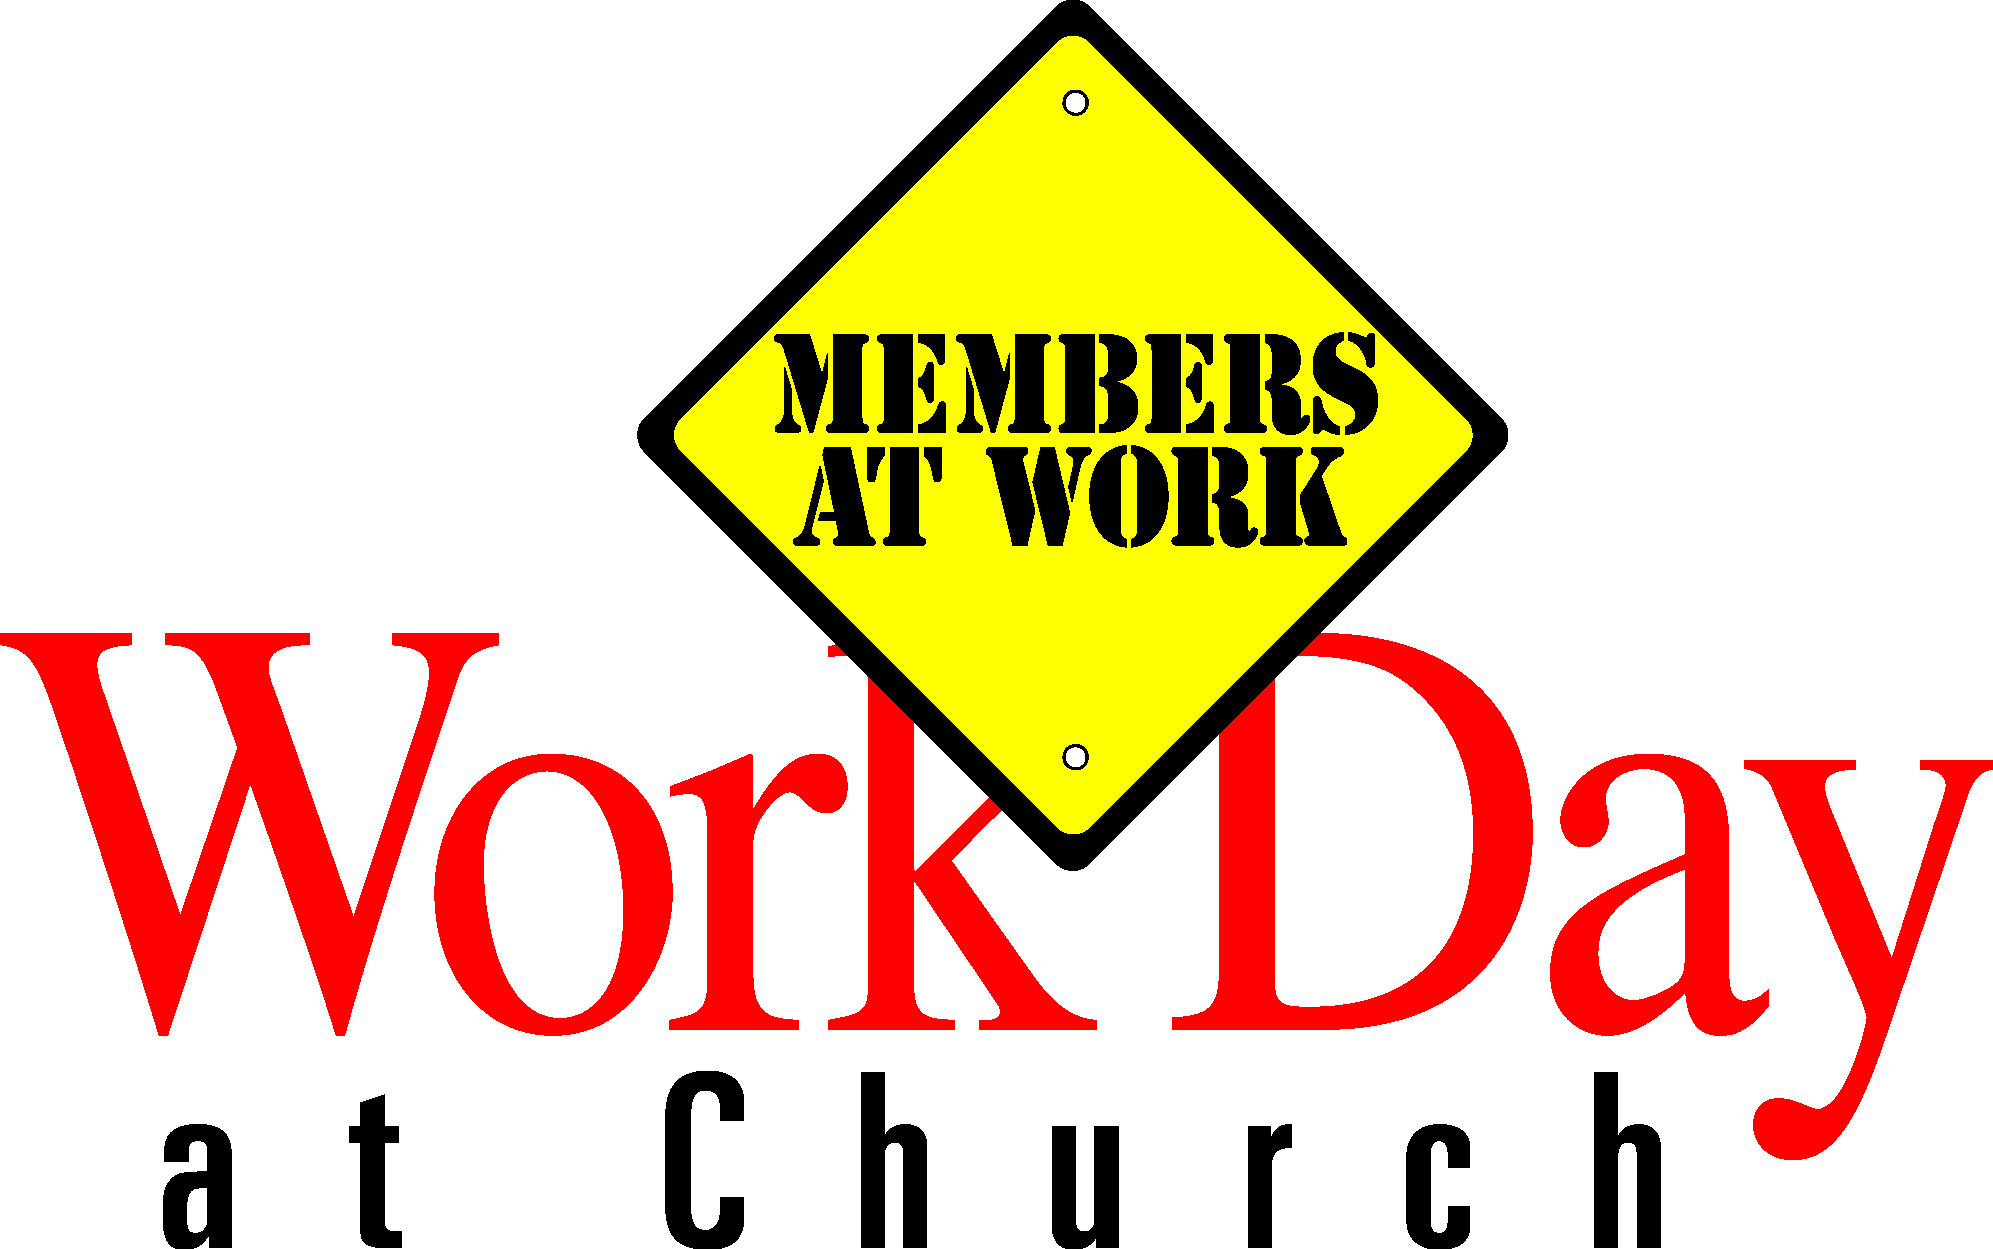 Church Work Day Clean Up Clip Art free image.